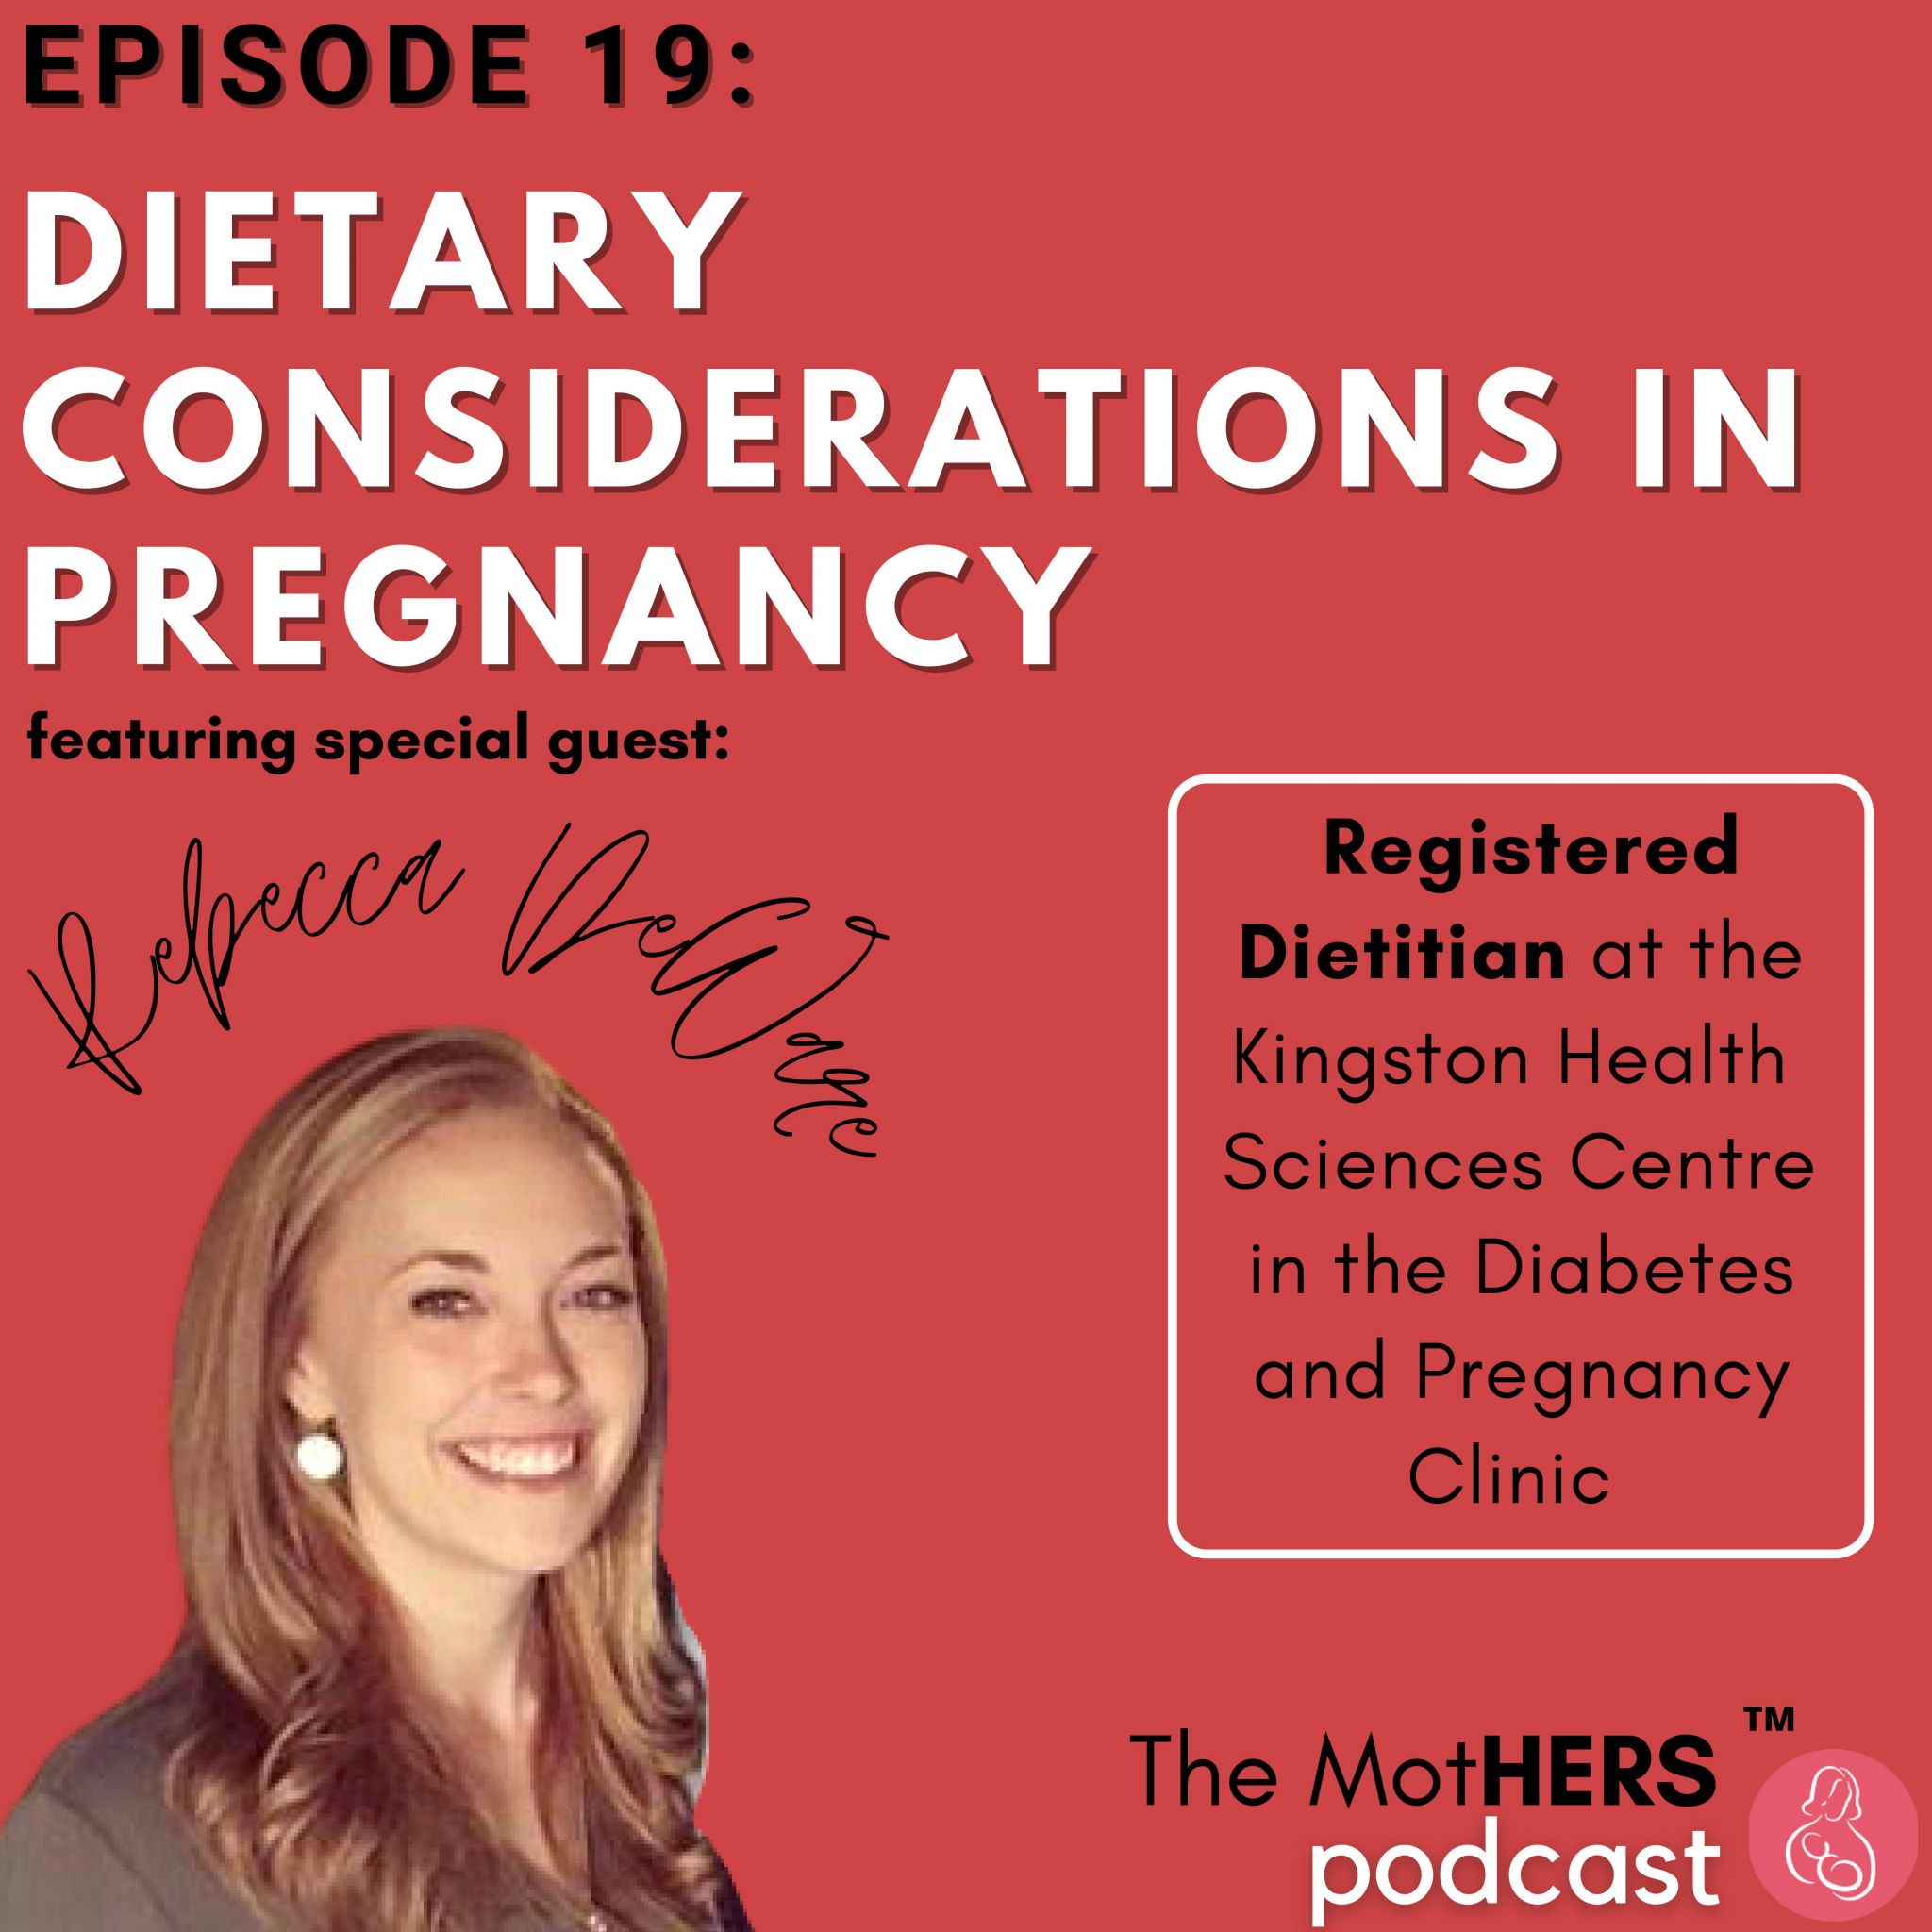 Episode 19 Dietary Considerations in Pregnancy